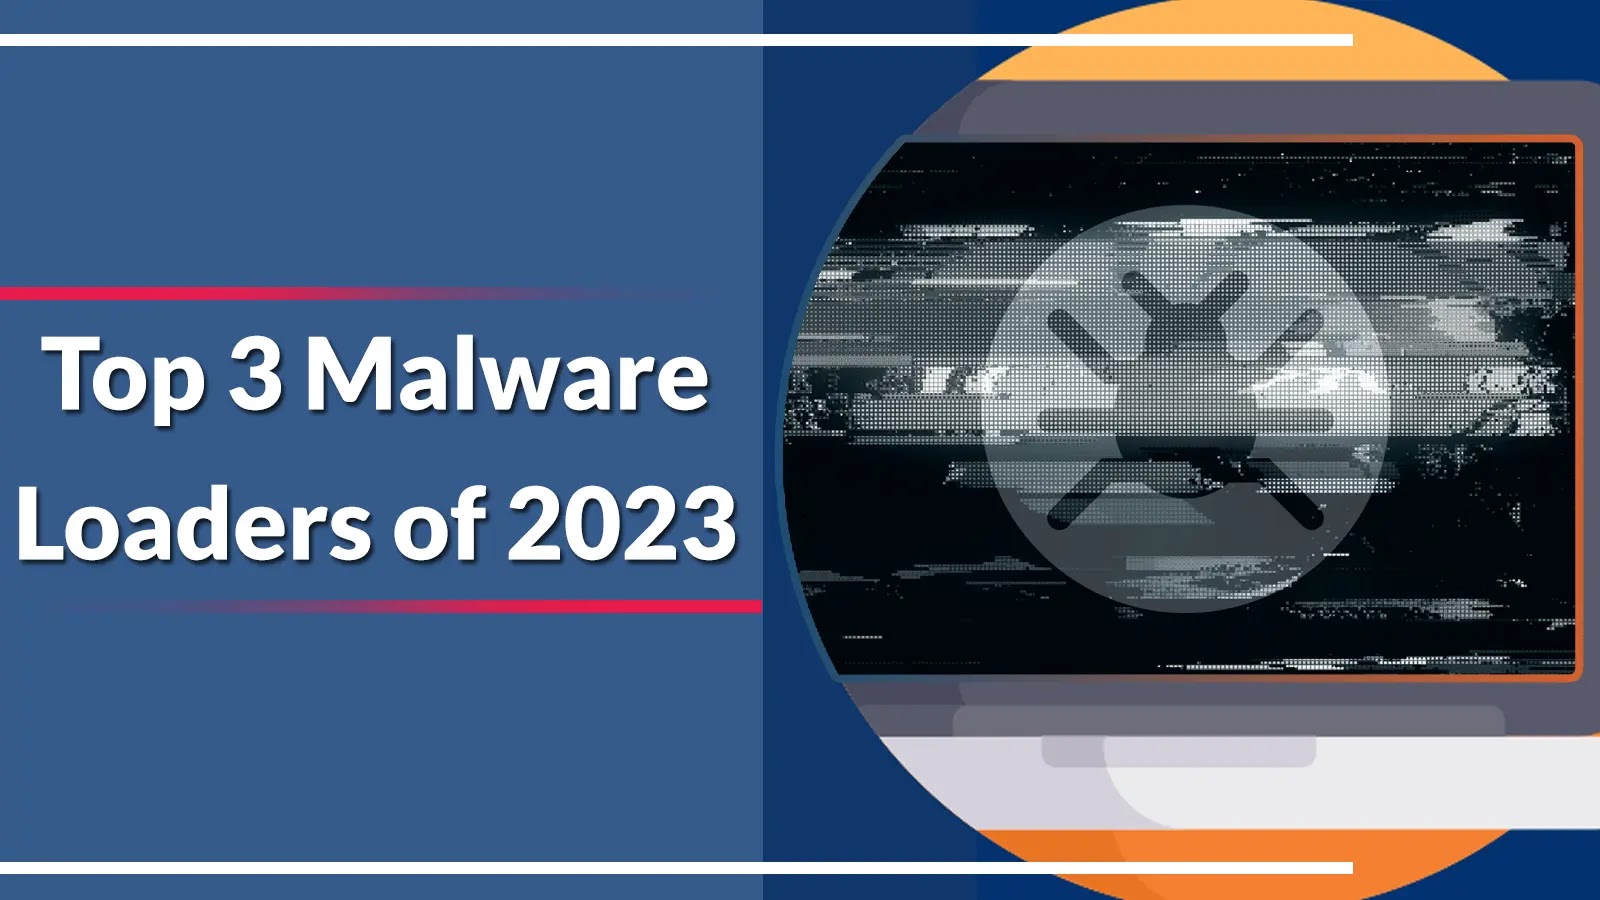 Top 3 Malware Loaders of 2023 that Fueling 80% of Cyber Attacks